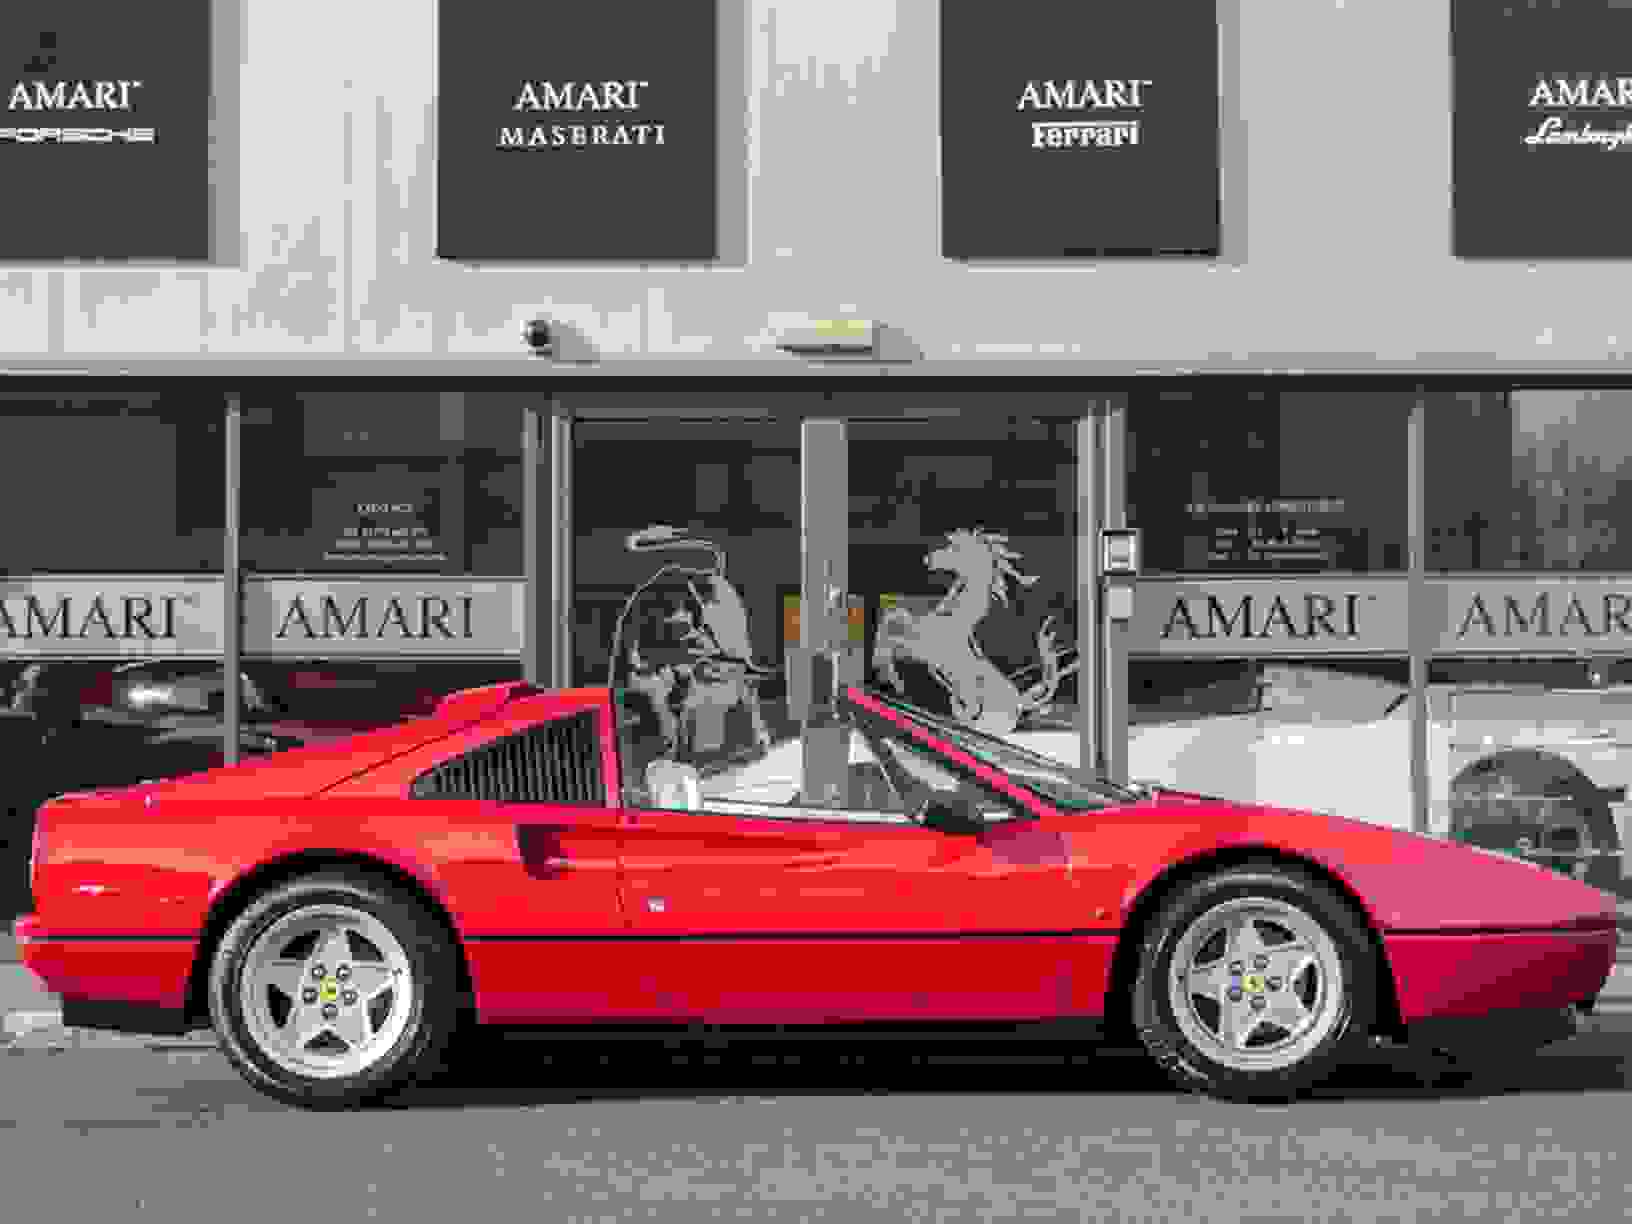 Ferrari 328 Buying Guide: Evolution of a mid-engined classic